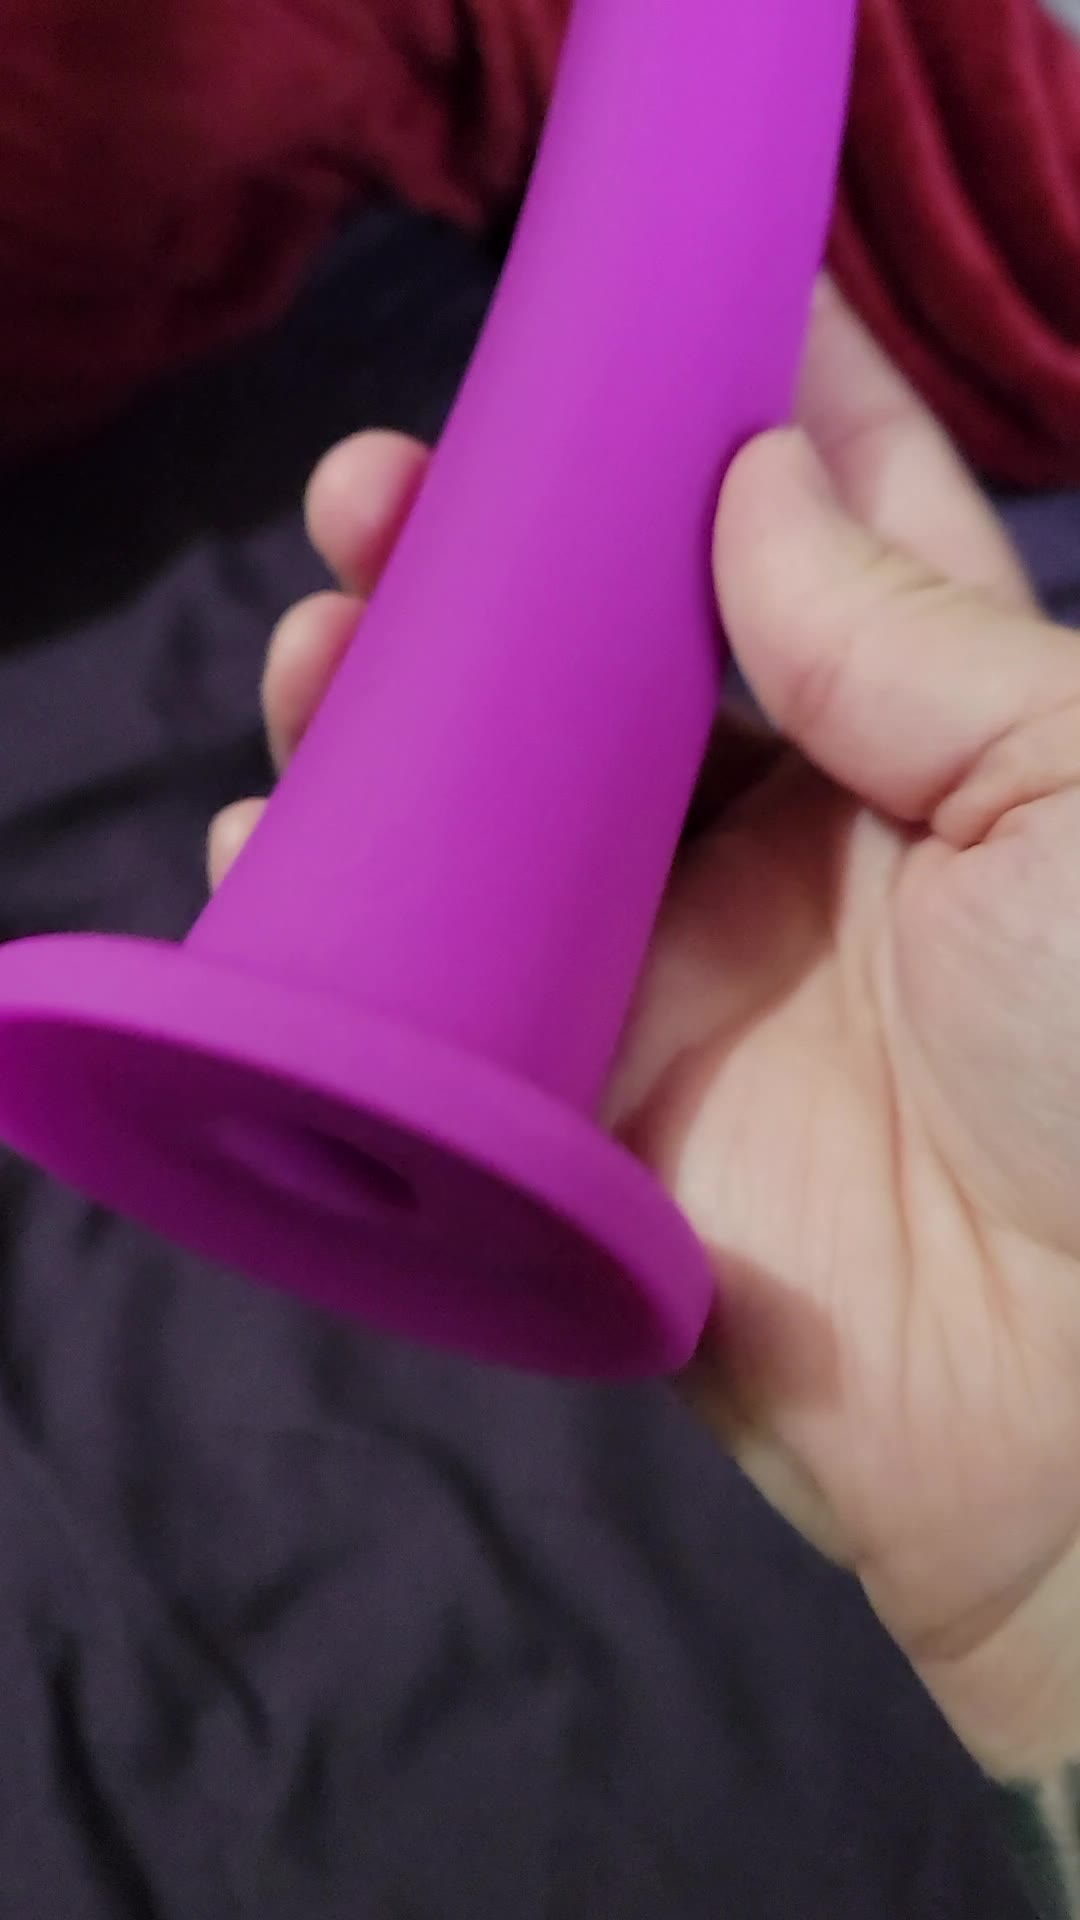 Lovehoney Curved Silicone Suction Cup Dildo 7 Inch. Slide 2